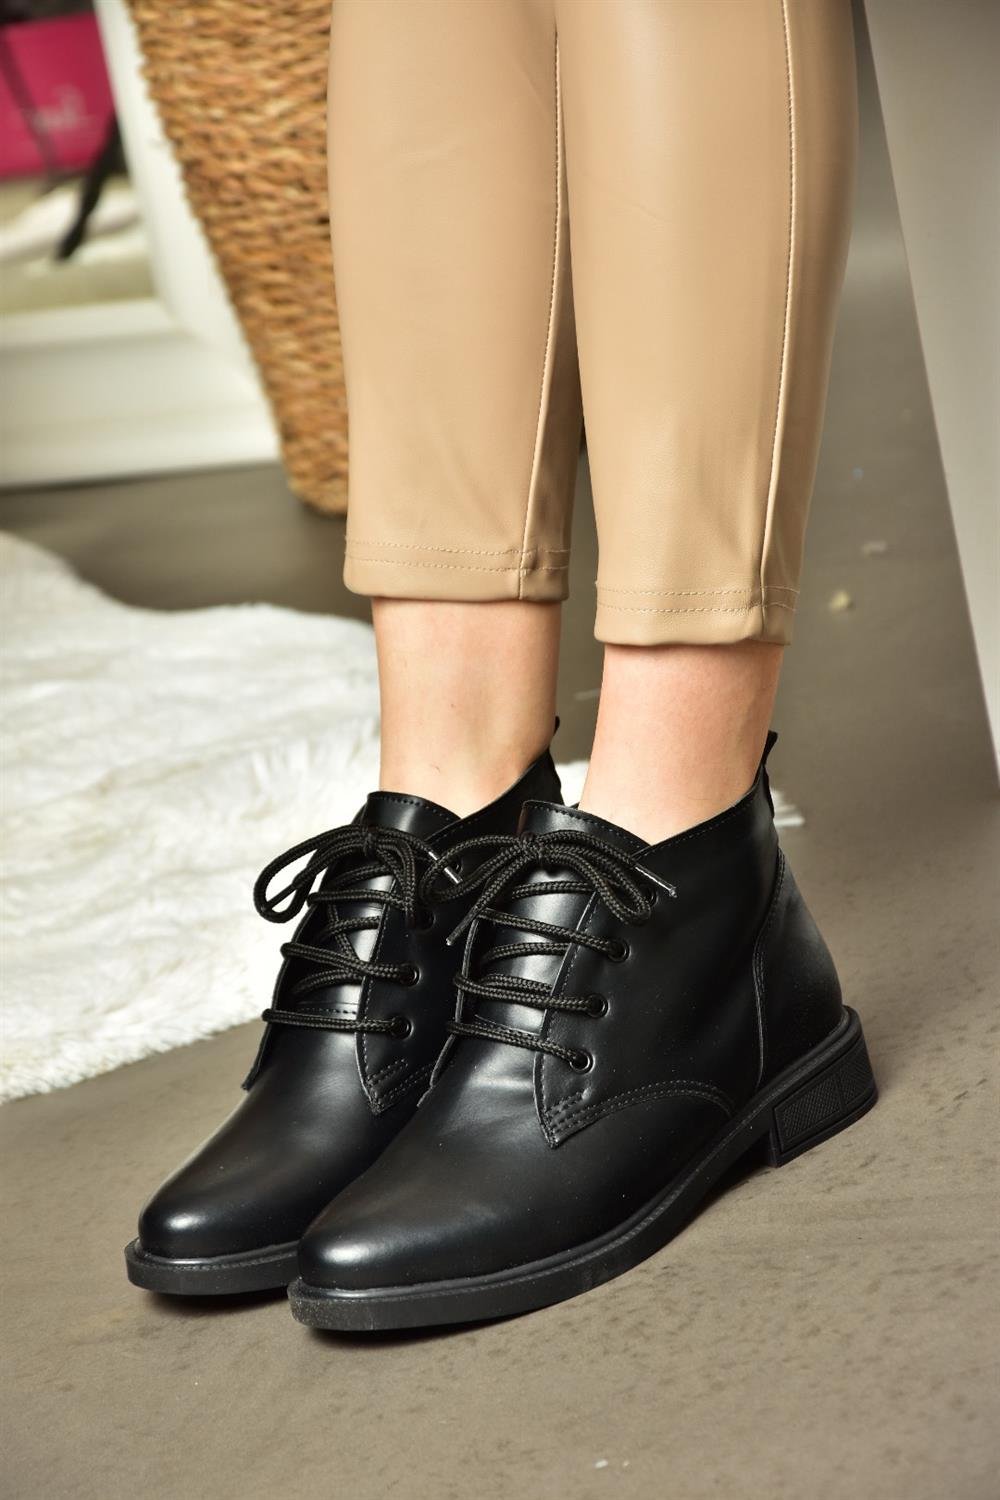 Black Leather Classic Women's Boots